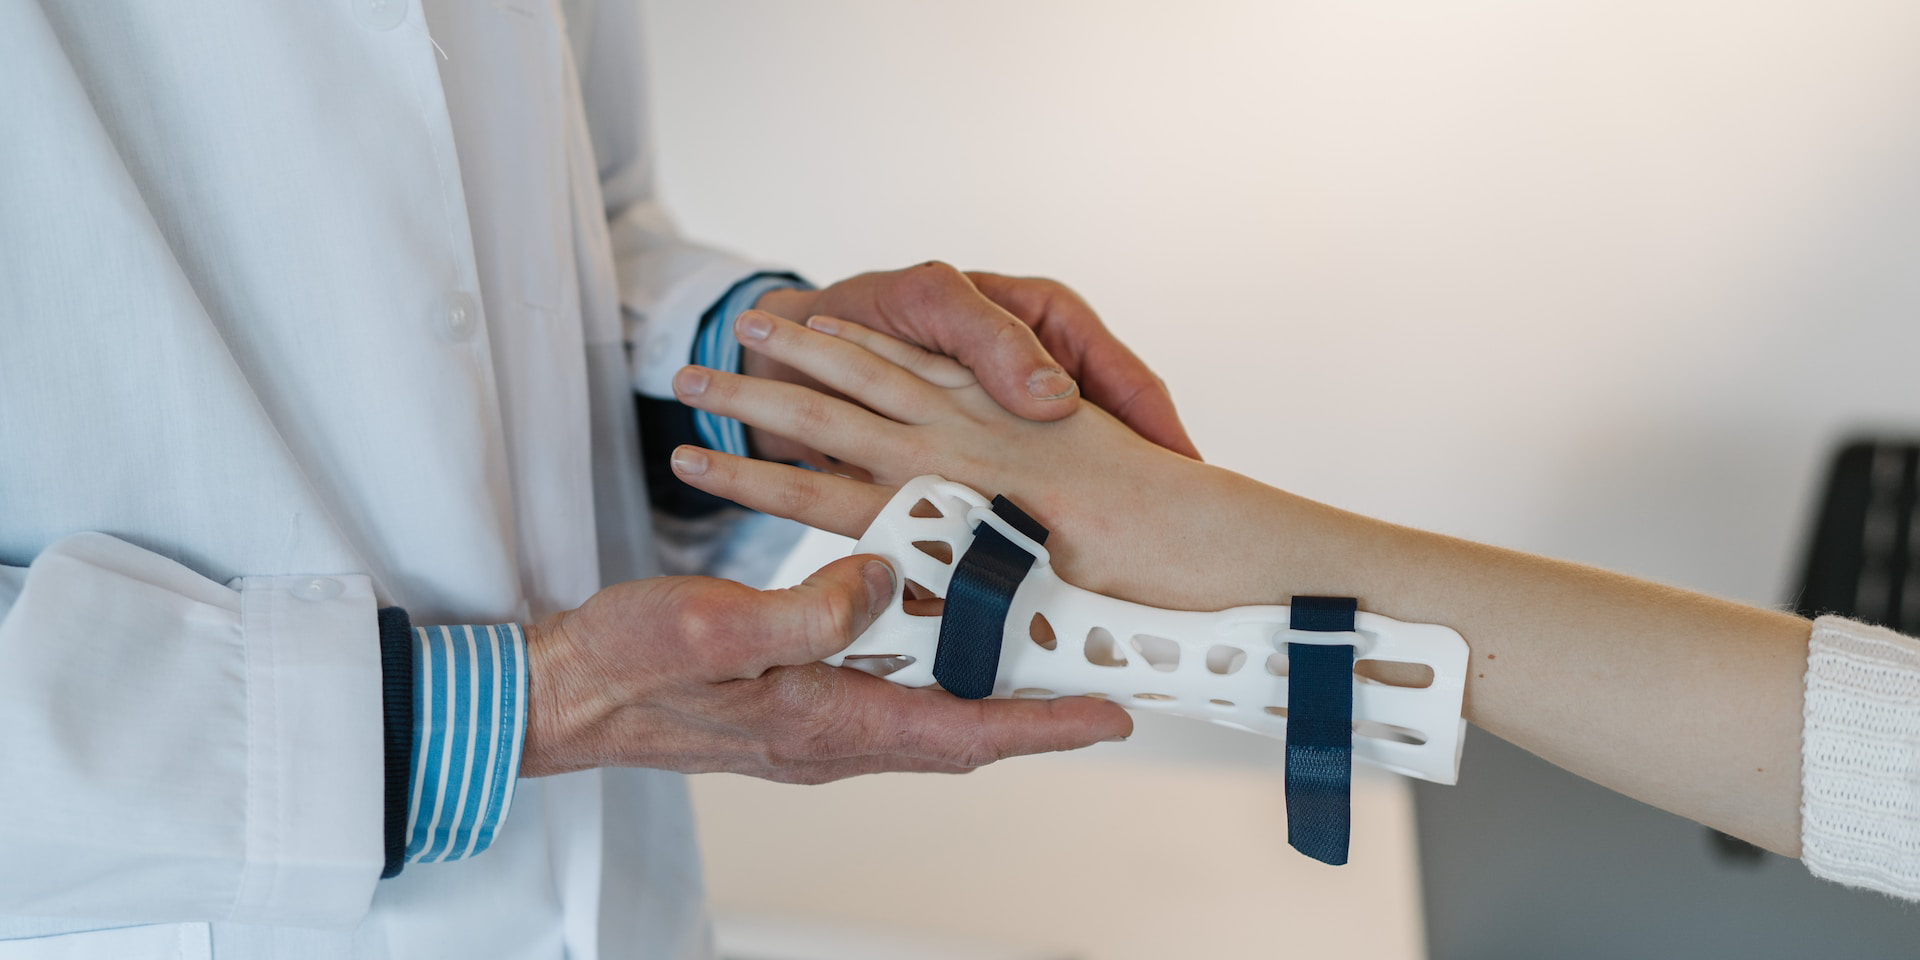 3D Printing Has Transformed the Prosthetics Sector